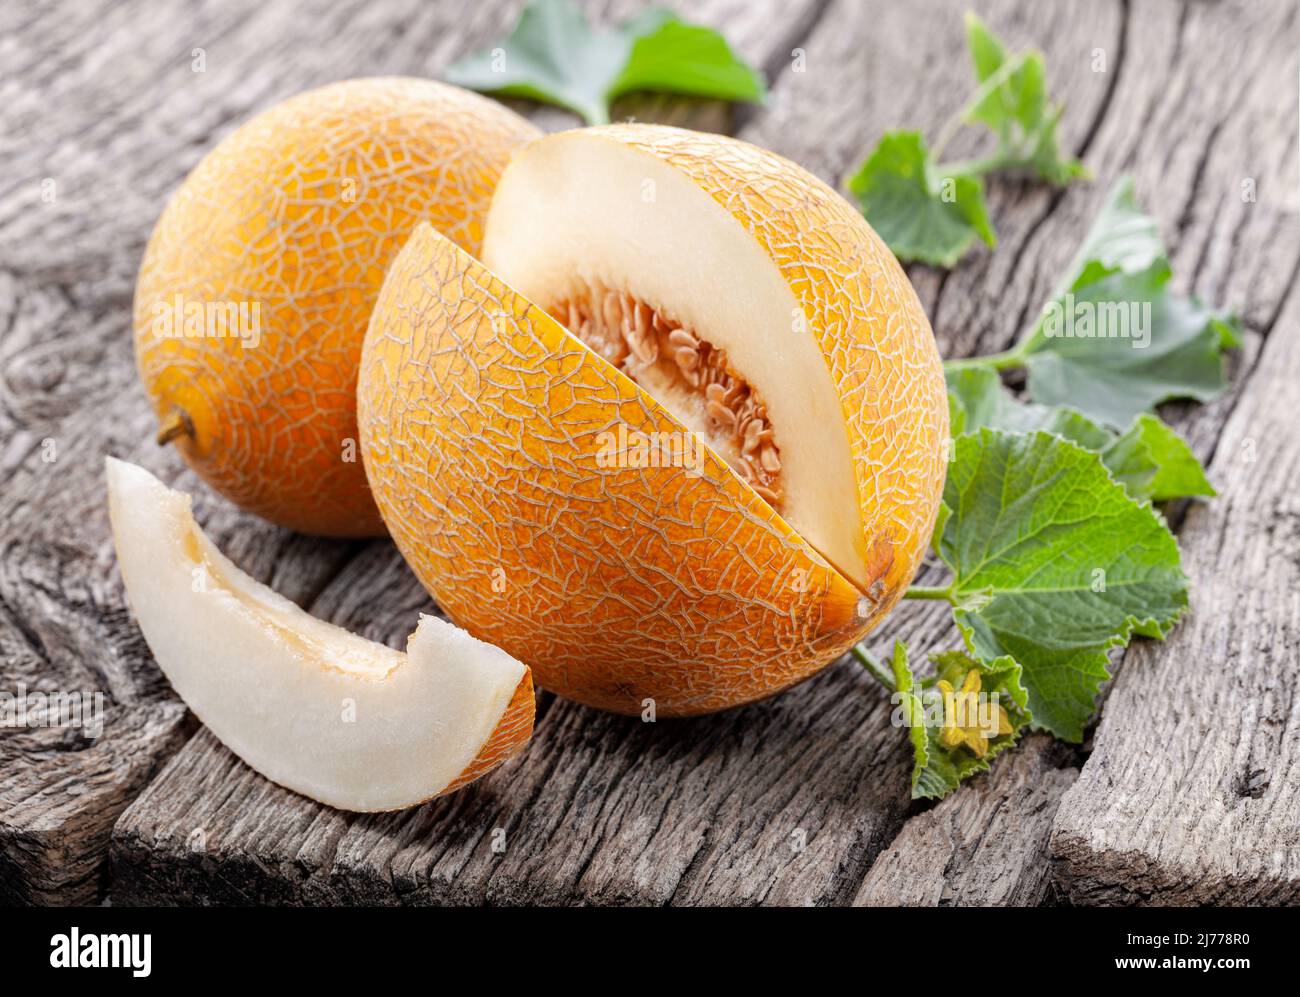 Ripe yellow melon with slices and melon leaves on a old wooden table. Stock Photo